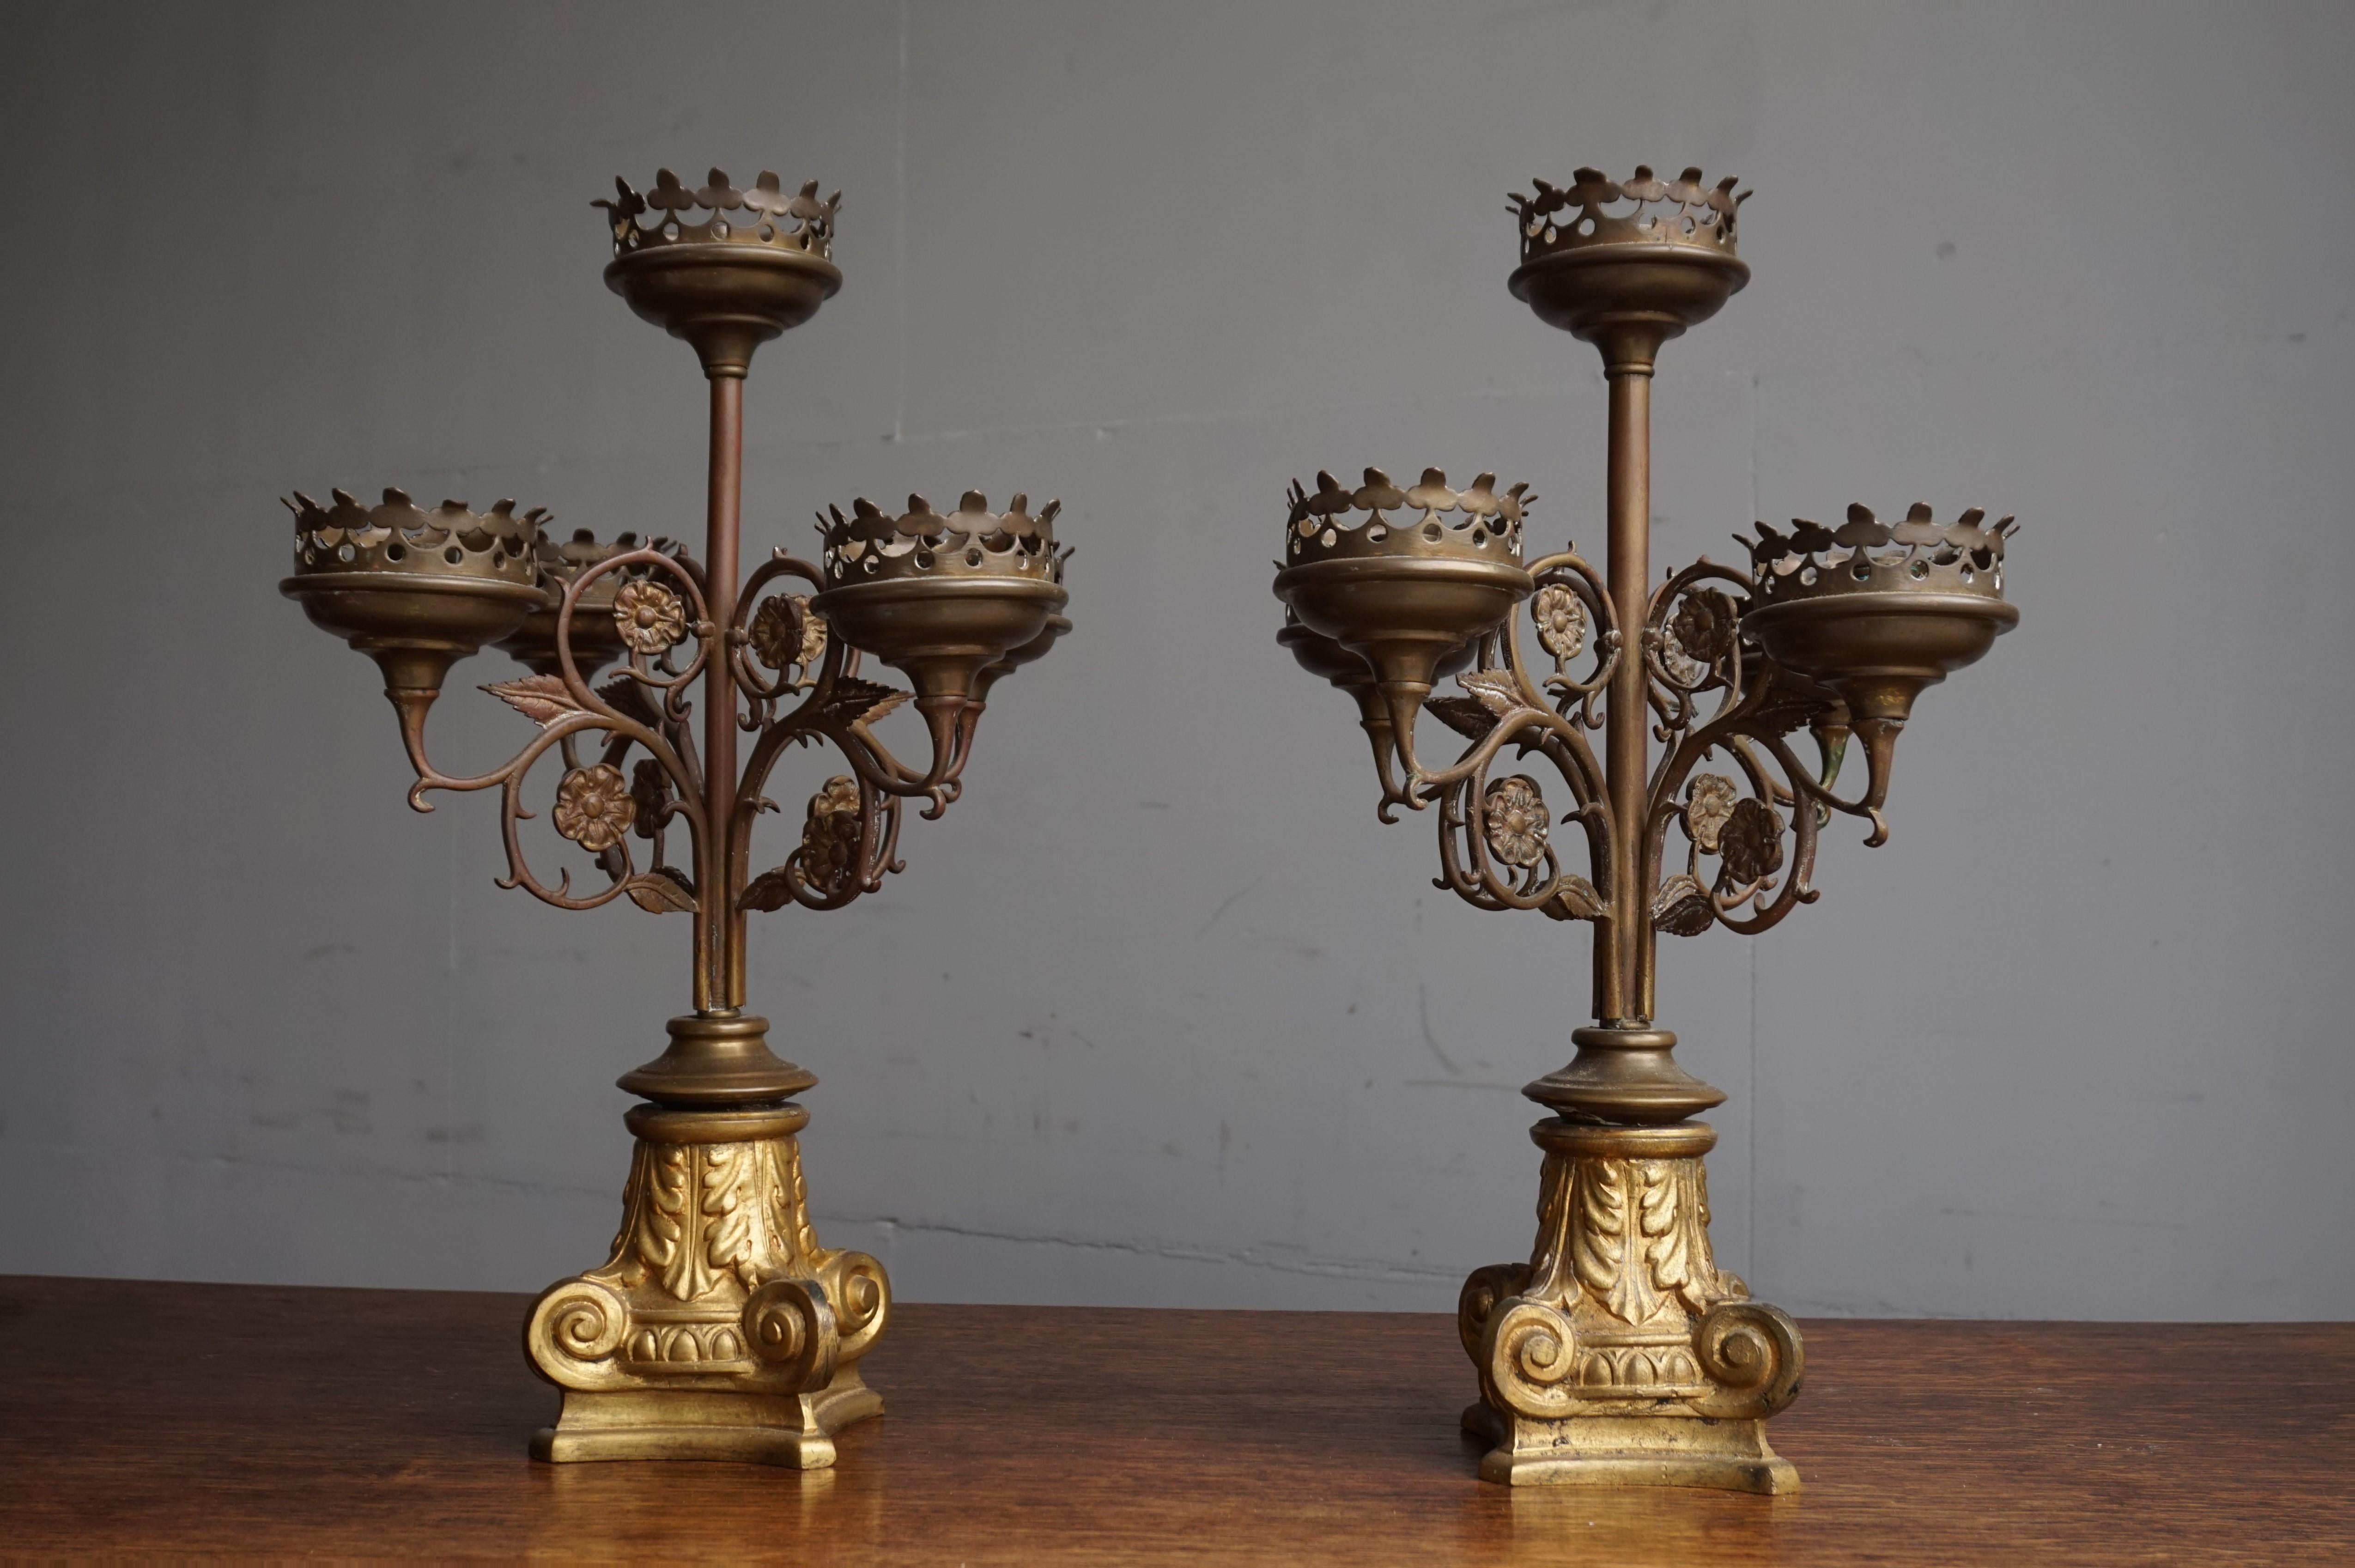 Antique Gothic Revival Pair of Bronze & Brass Table Candelabras / Candle Stands 12